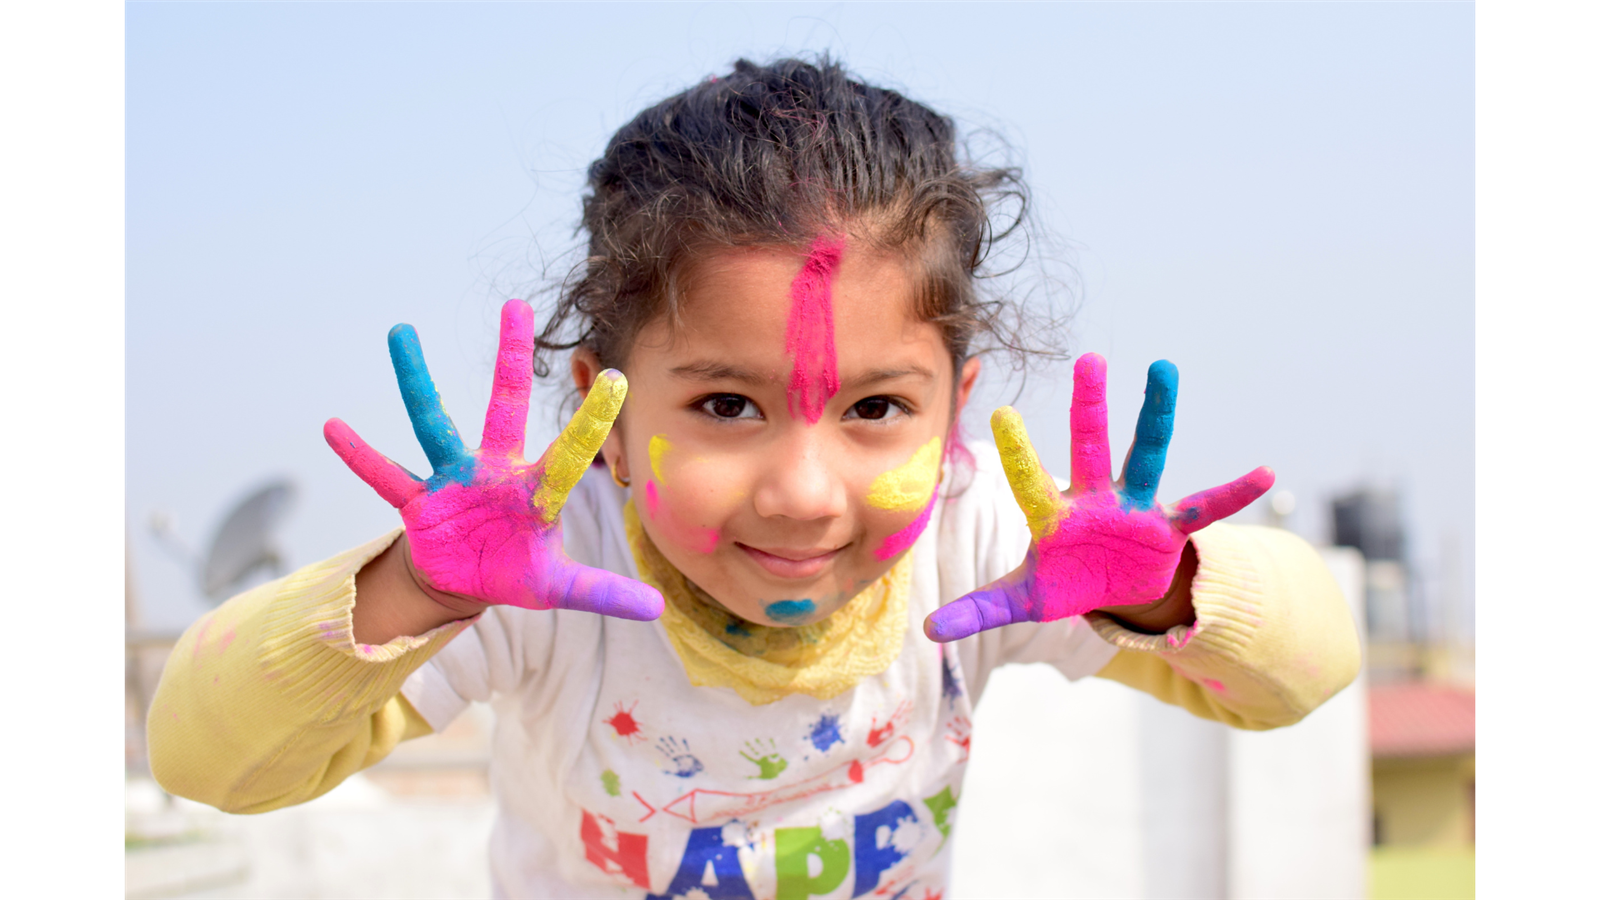  Picture of a child with paint on face